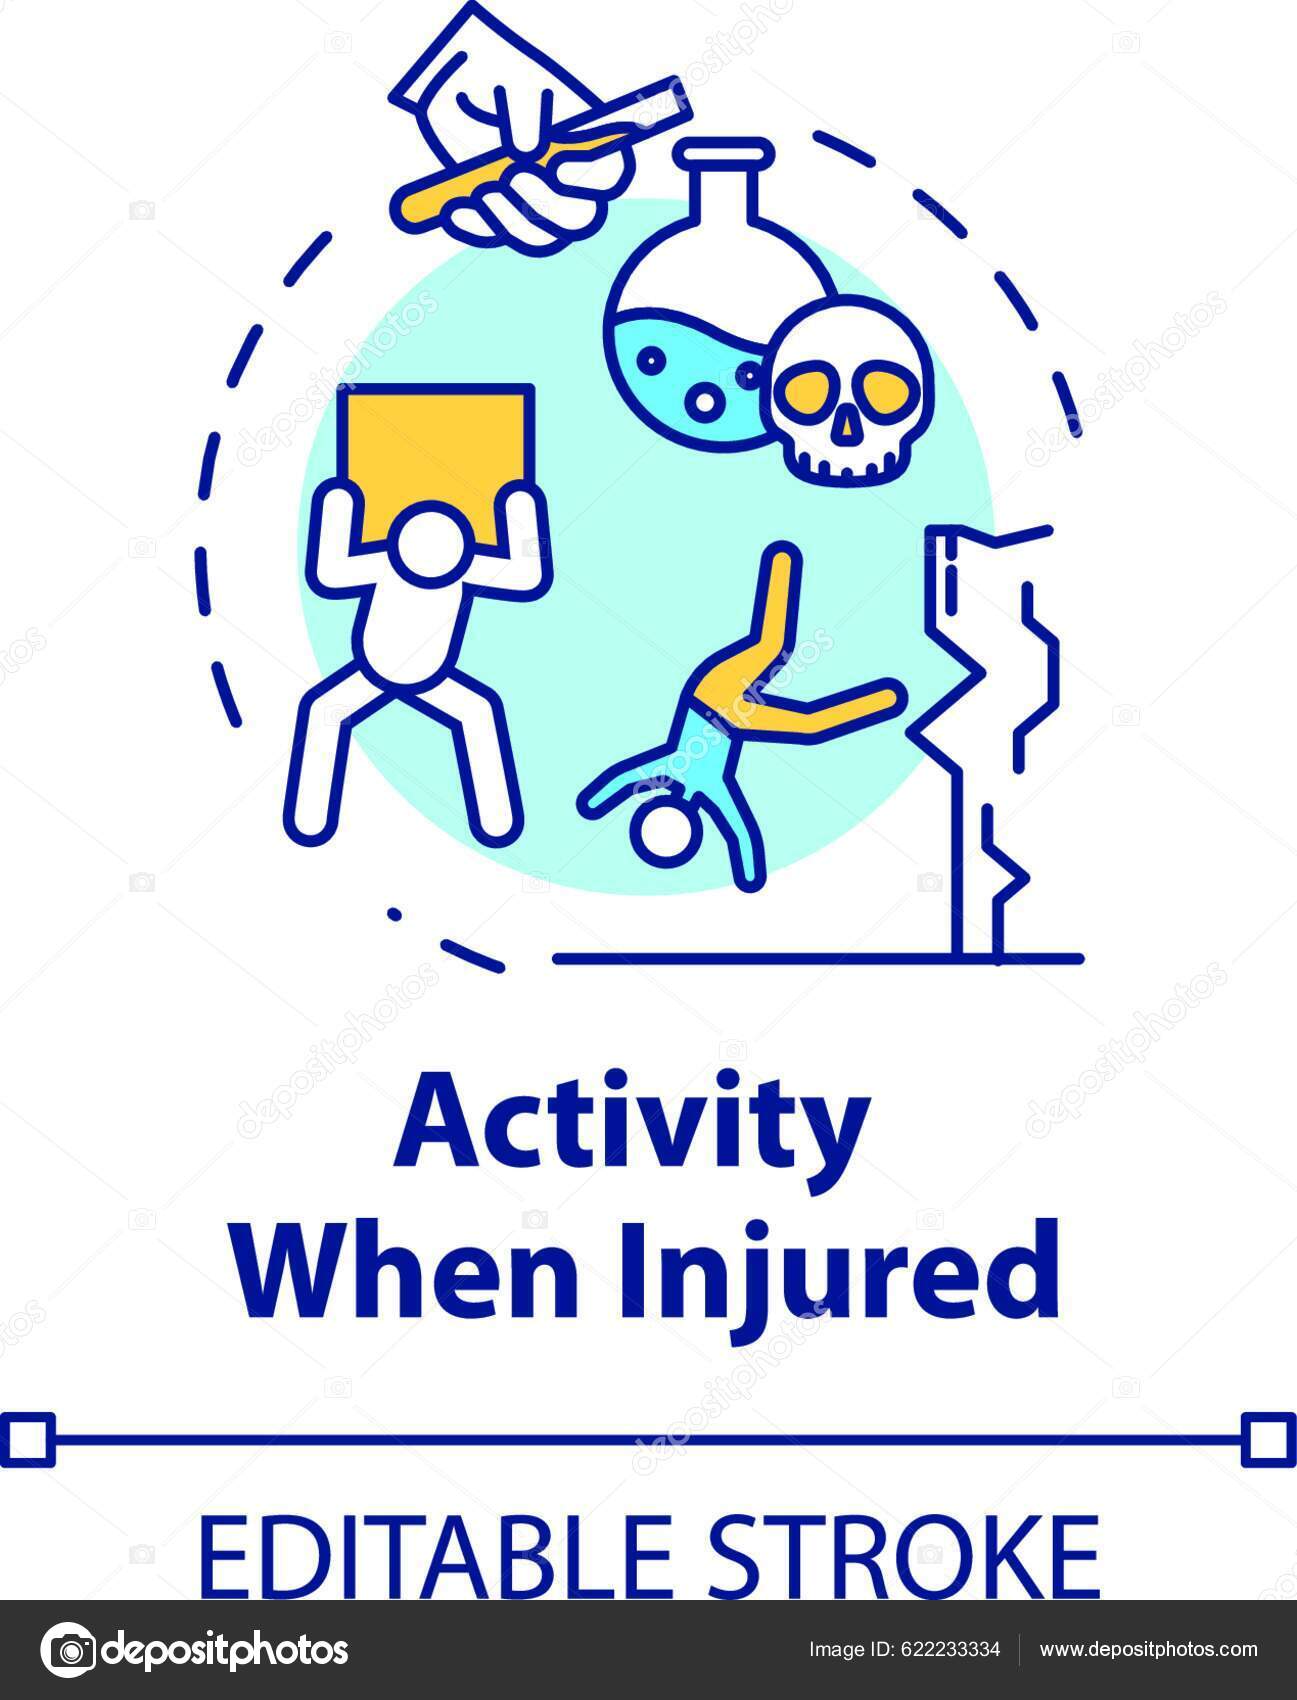 Safety Posters | Health and Safety Information | Makrosafe